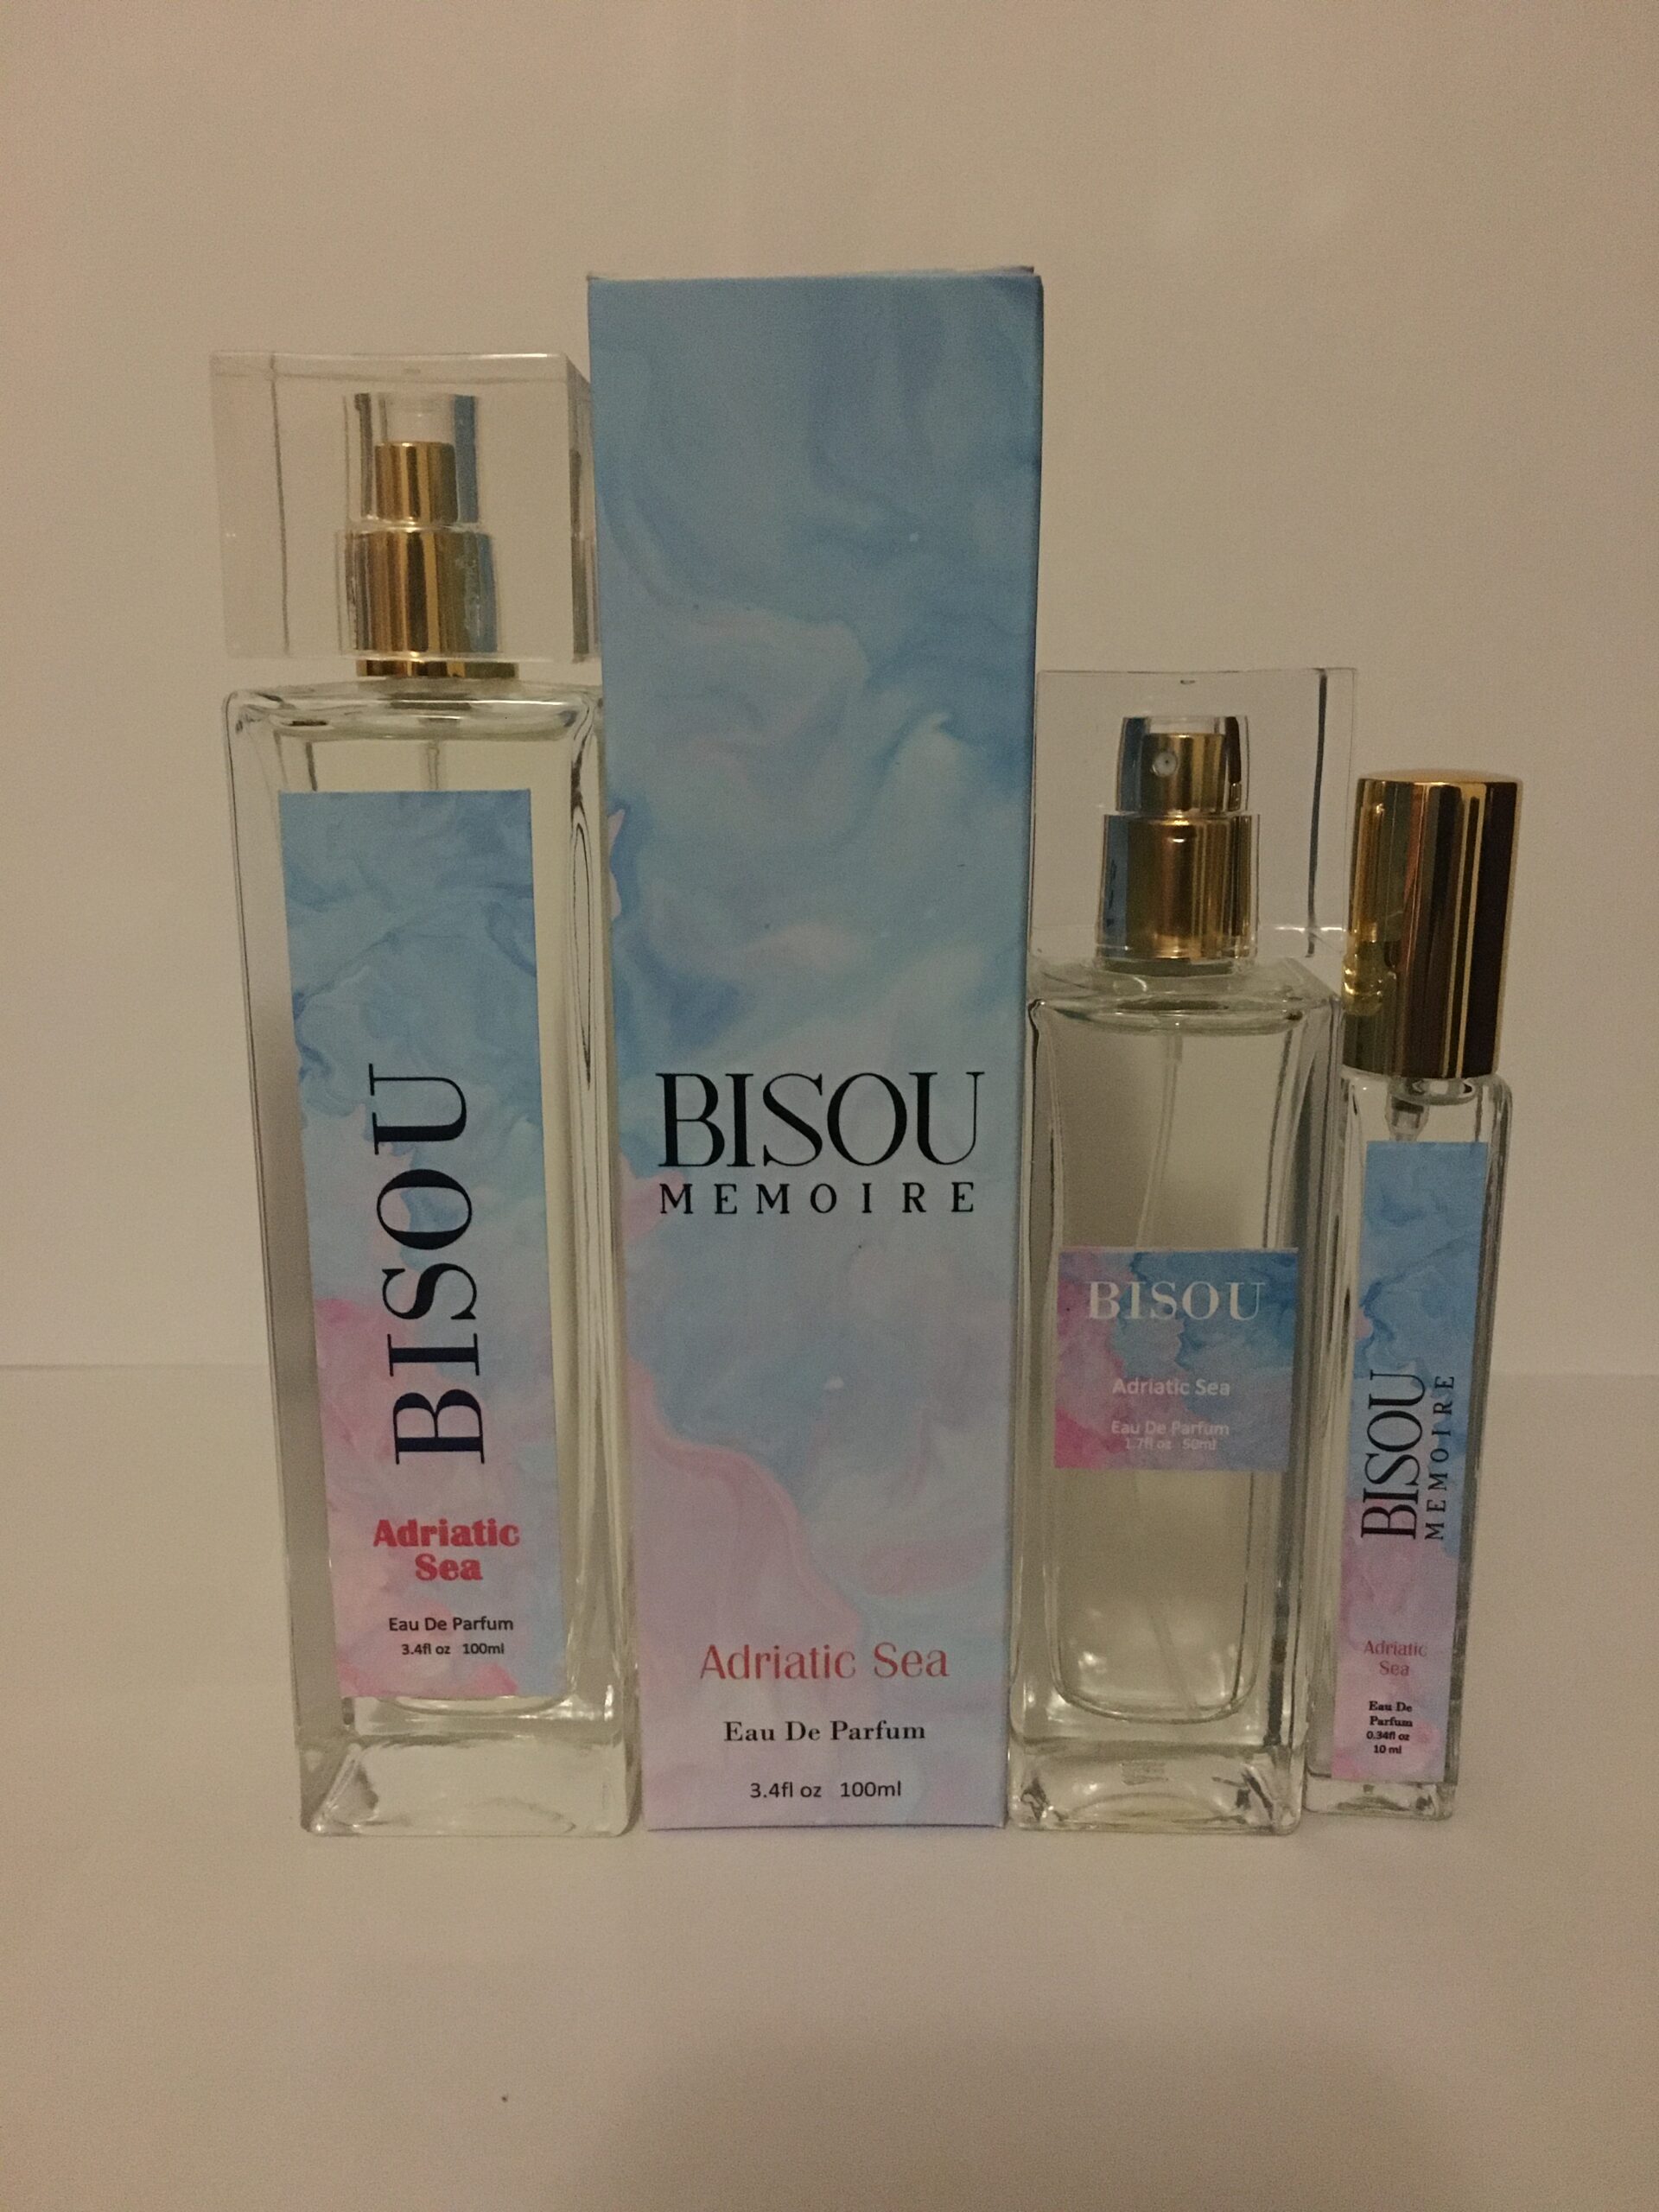 A group of three different bottles of perfume.